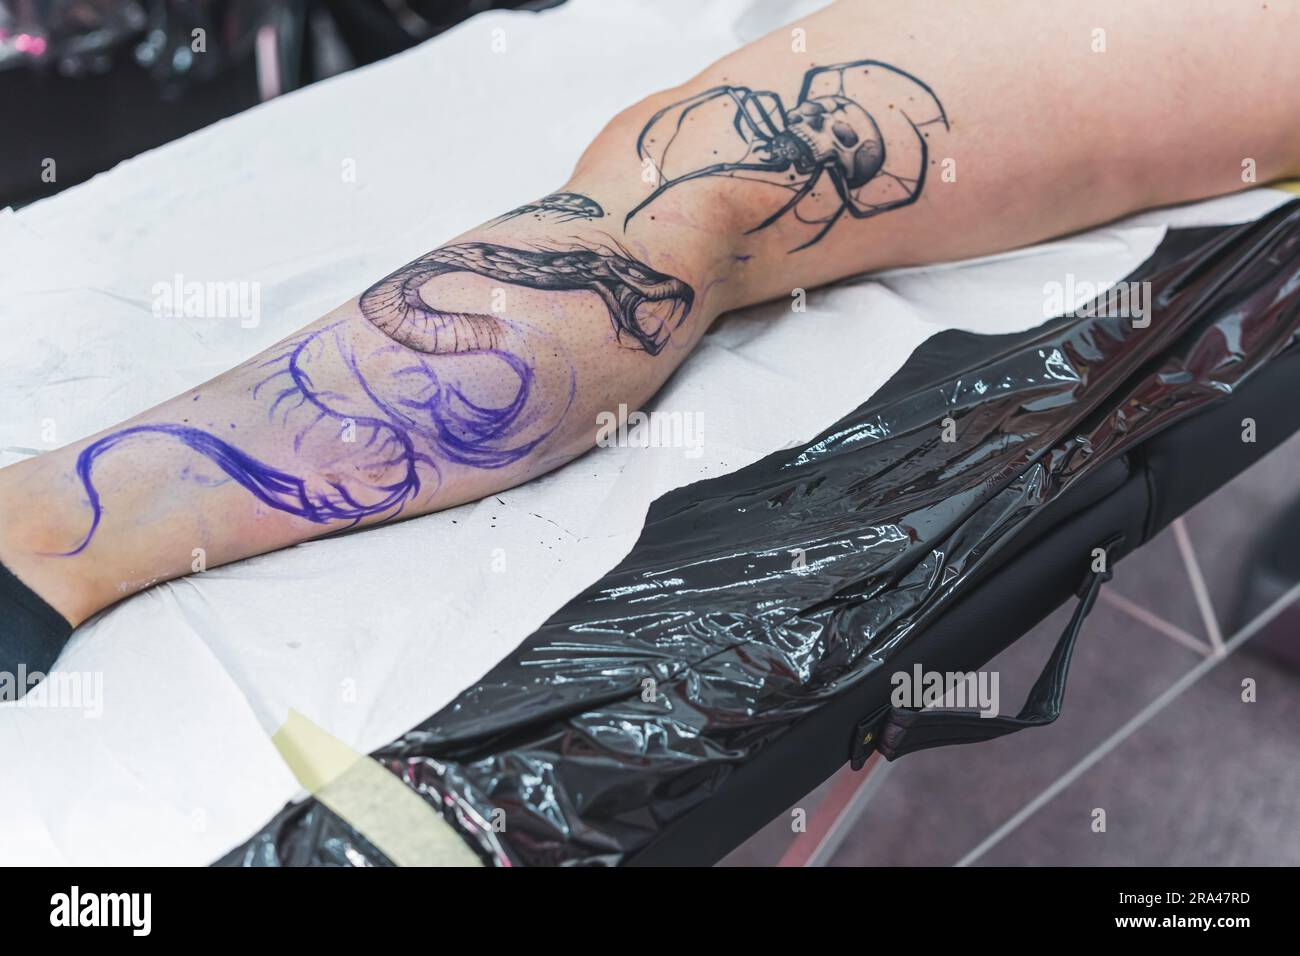 process of creating a new tattoo on a customers leg snake tattoo high quality photo 2RA47RD